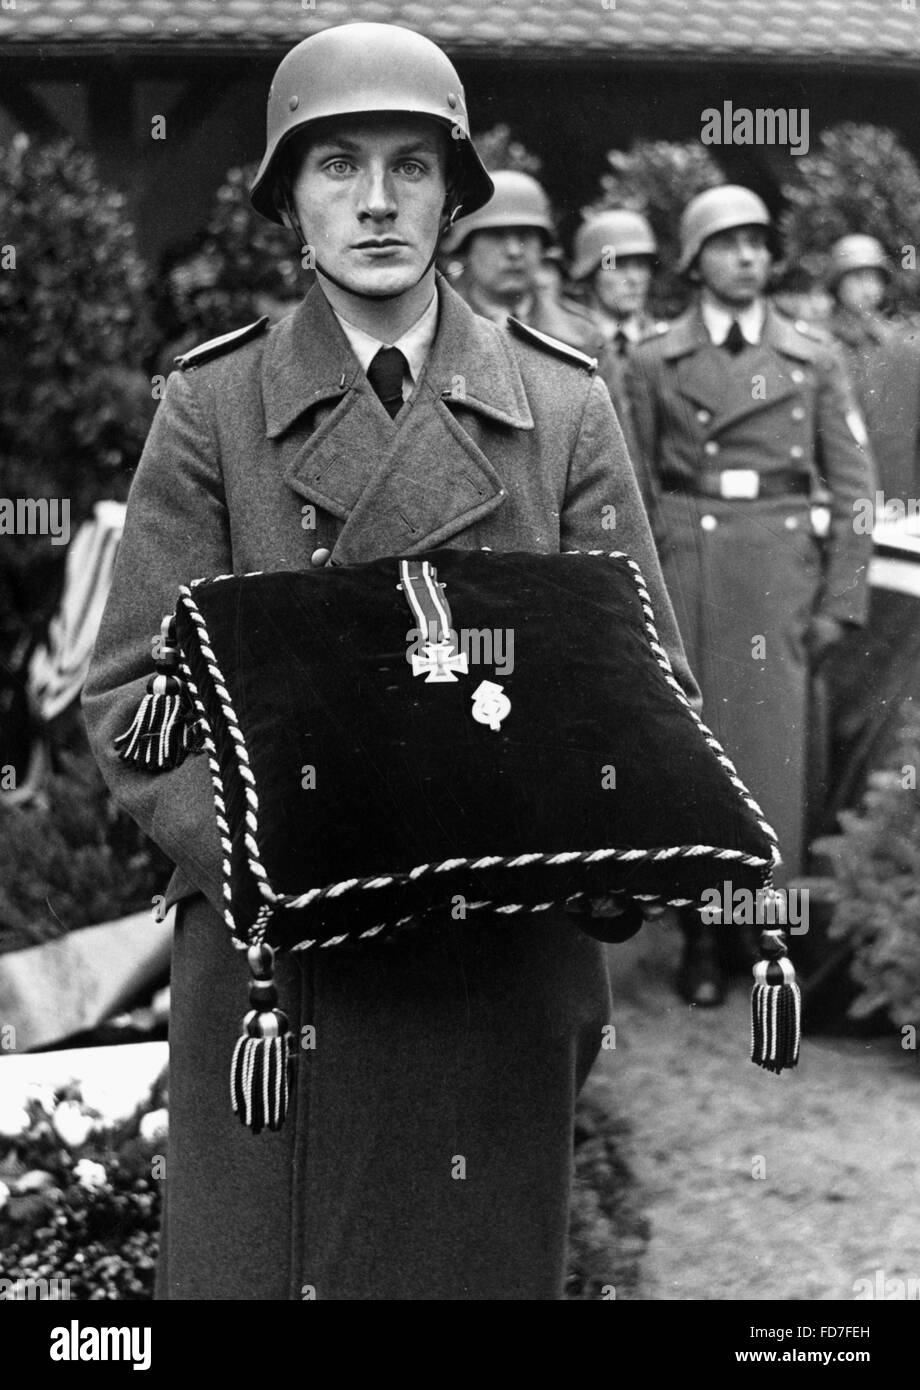 Posthumous awarding of the Iron Cross to Luftwaffe auxiliary in Berlin, 1943 Stock Photo